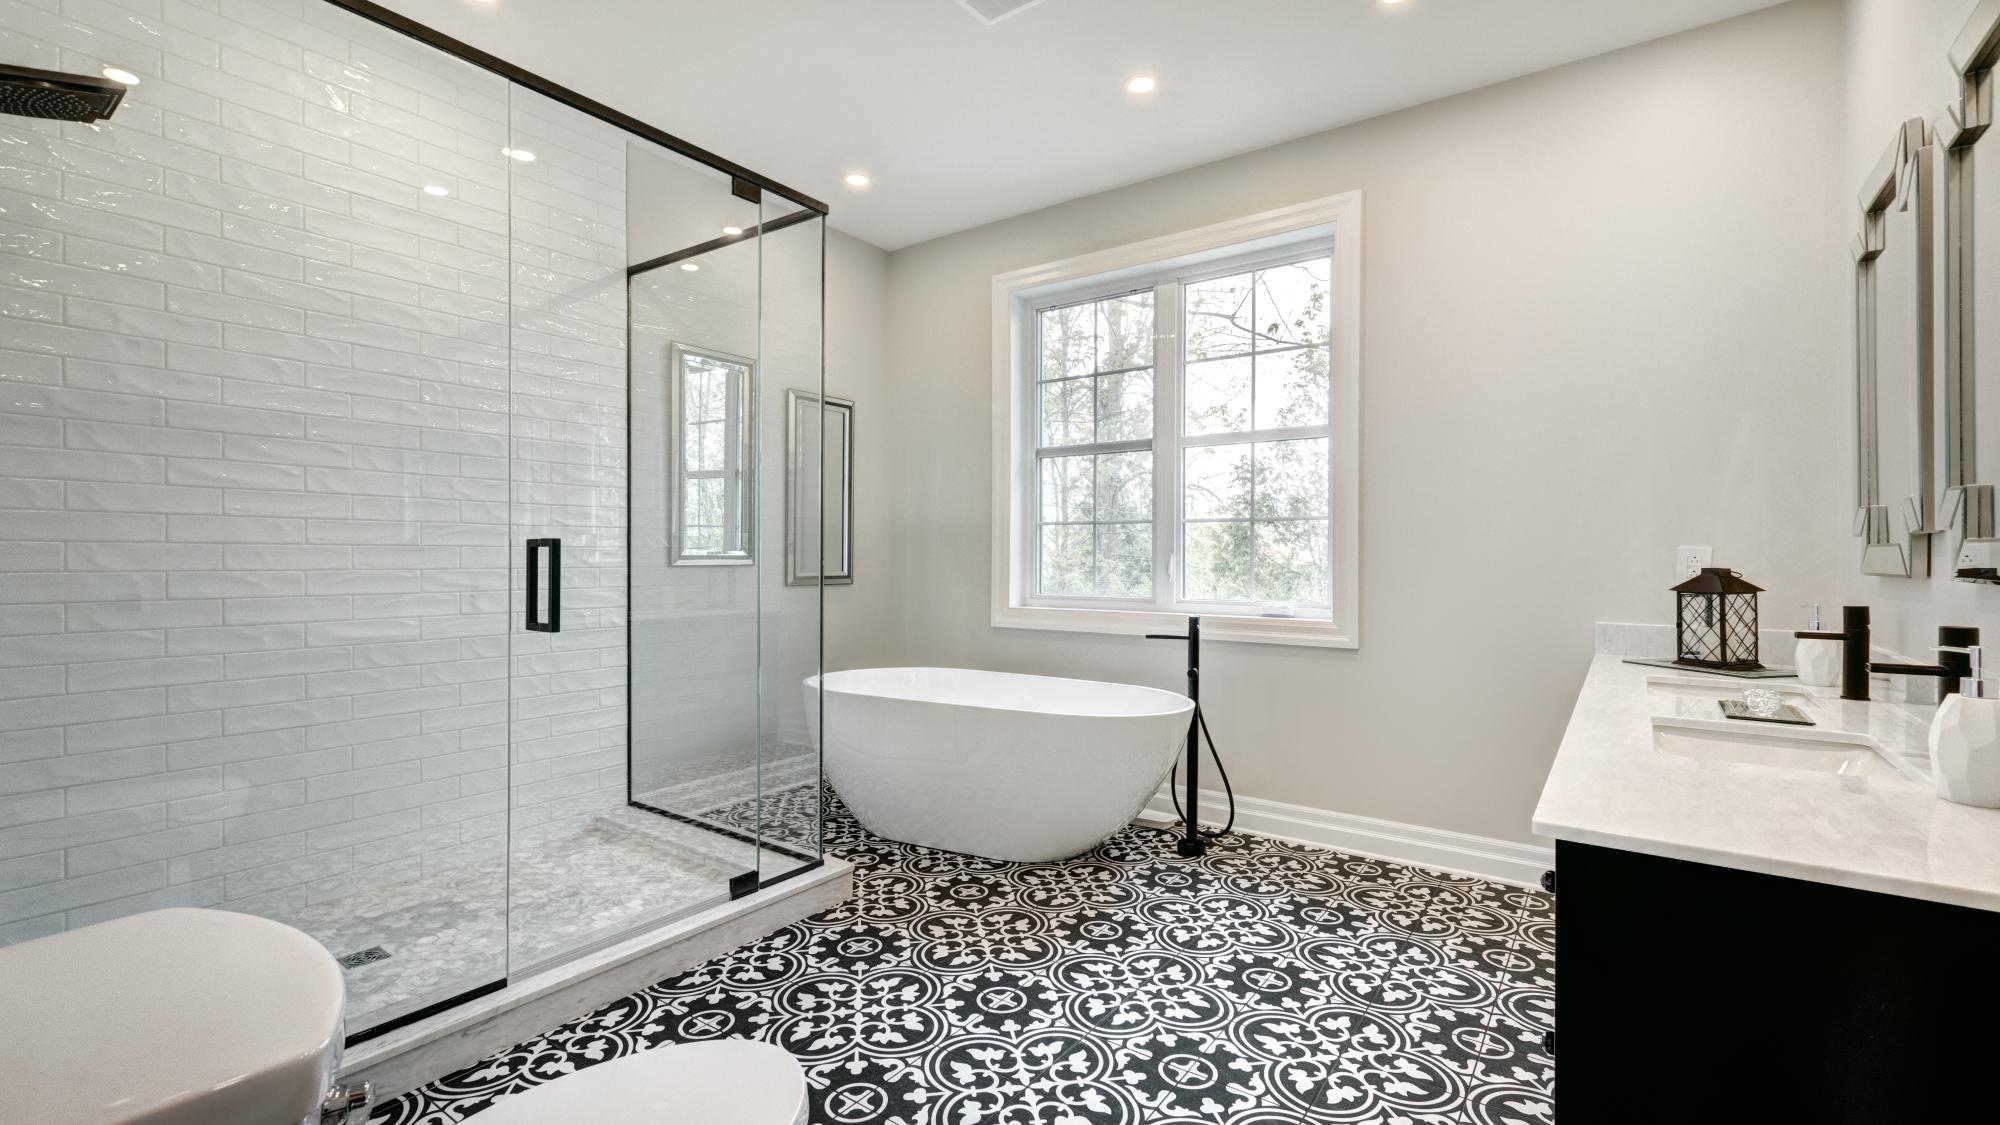 Benefits of Hiring Our Professional Bathroom Remodeling Service